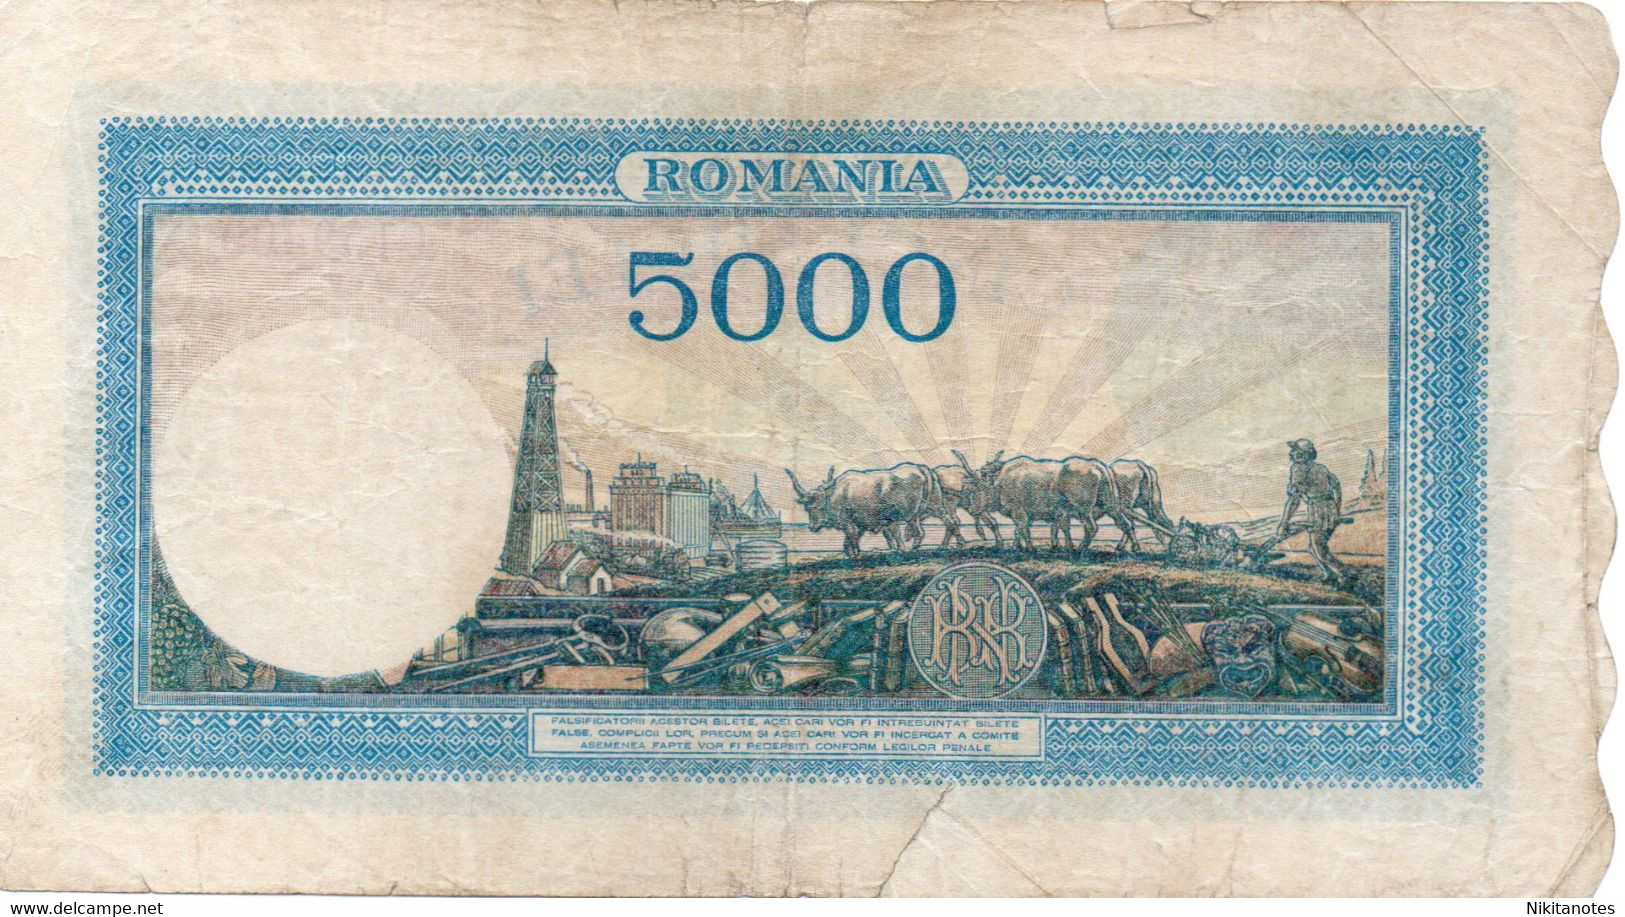 1945 28 SEPT ROMANIA Banconote 5000 Lei Note See Scan - Roemenië